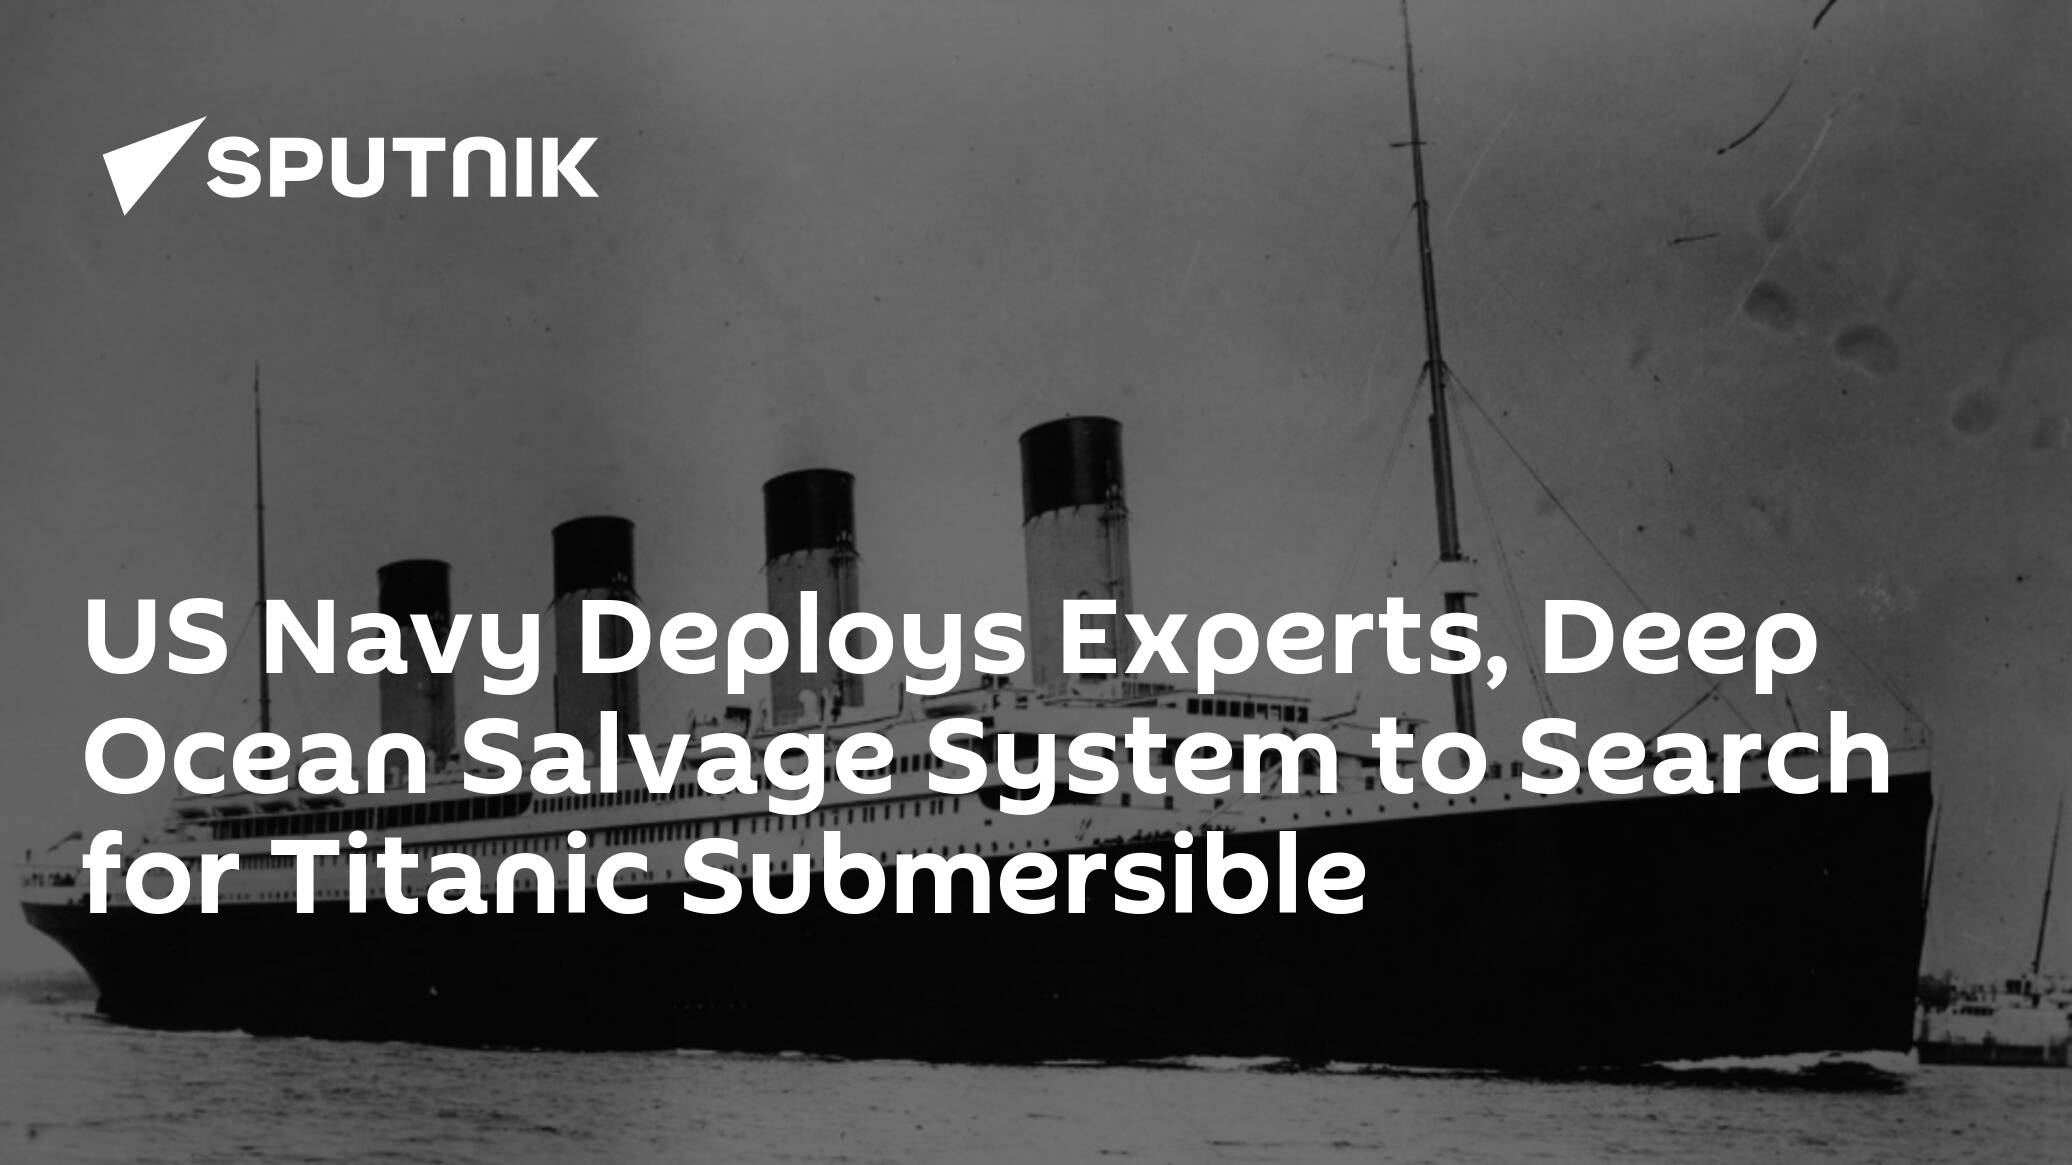 US Navy Deploys Experts, Deep Ocean Salvage System to Search for Titanic Submersible